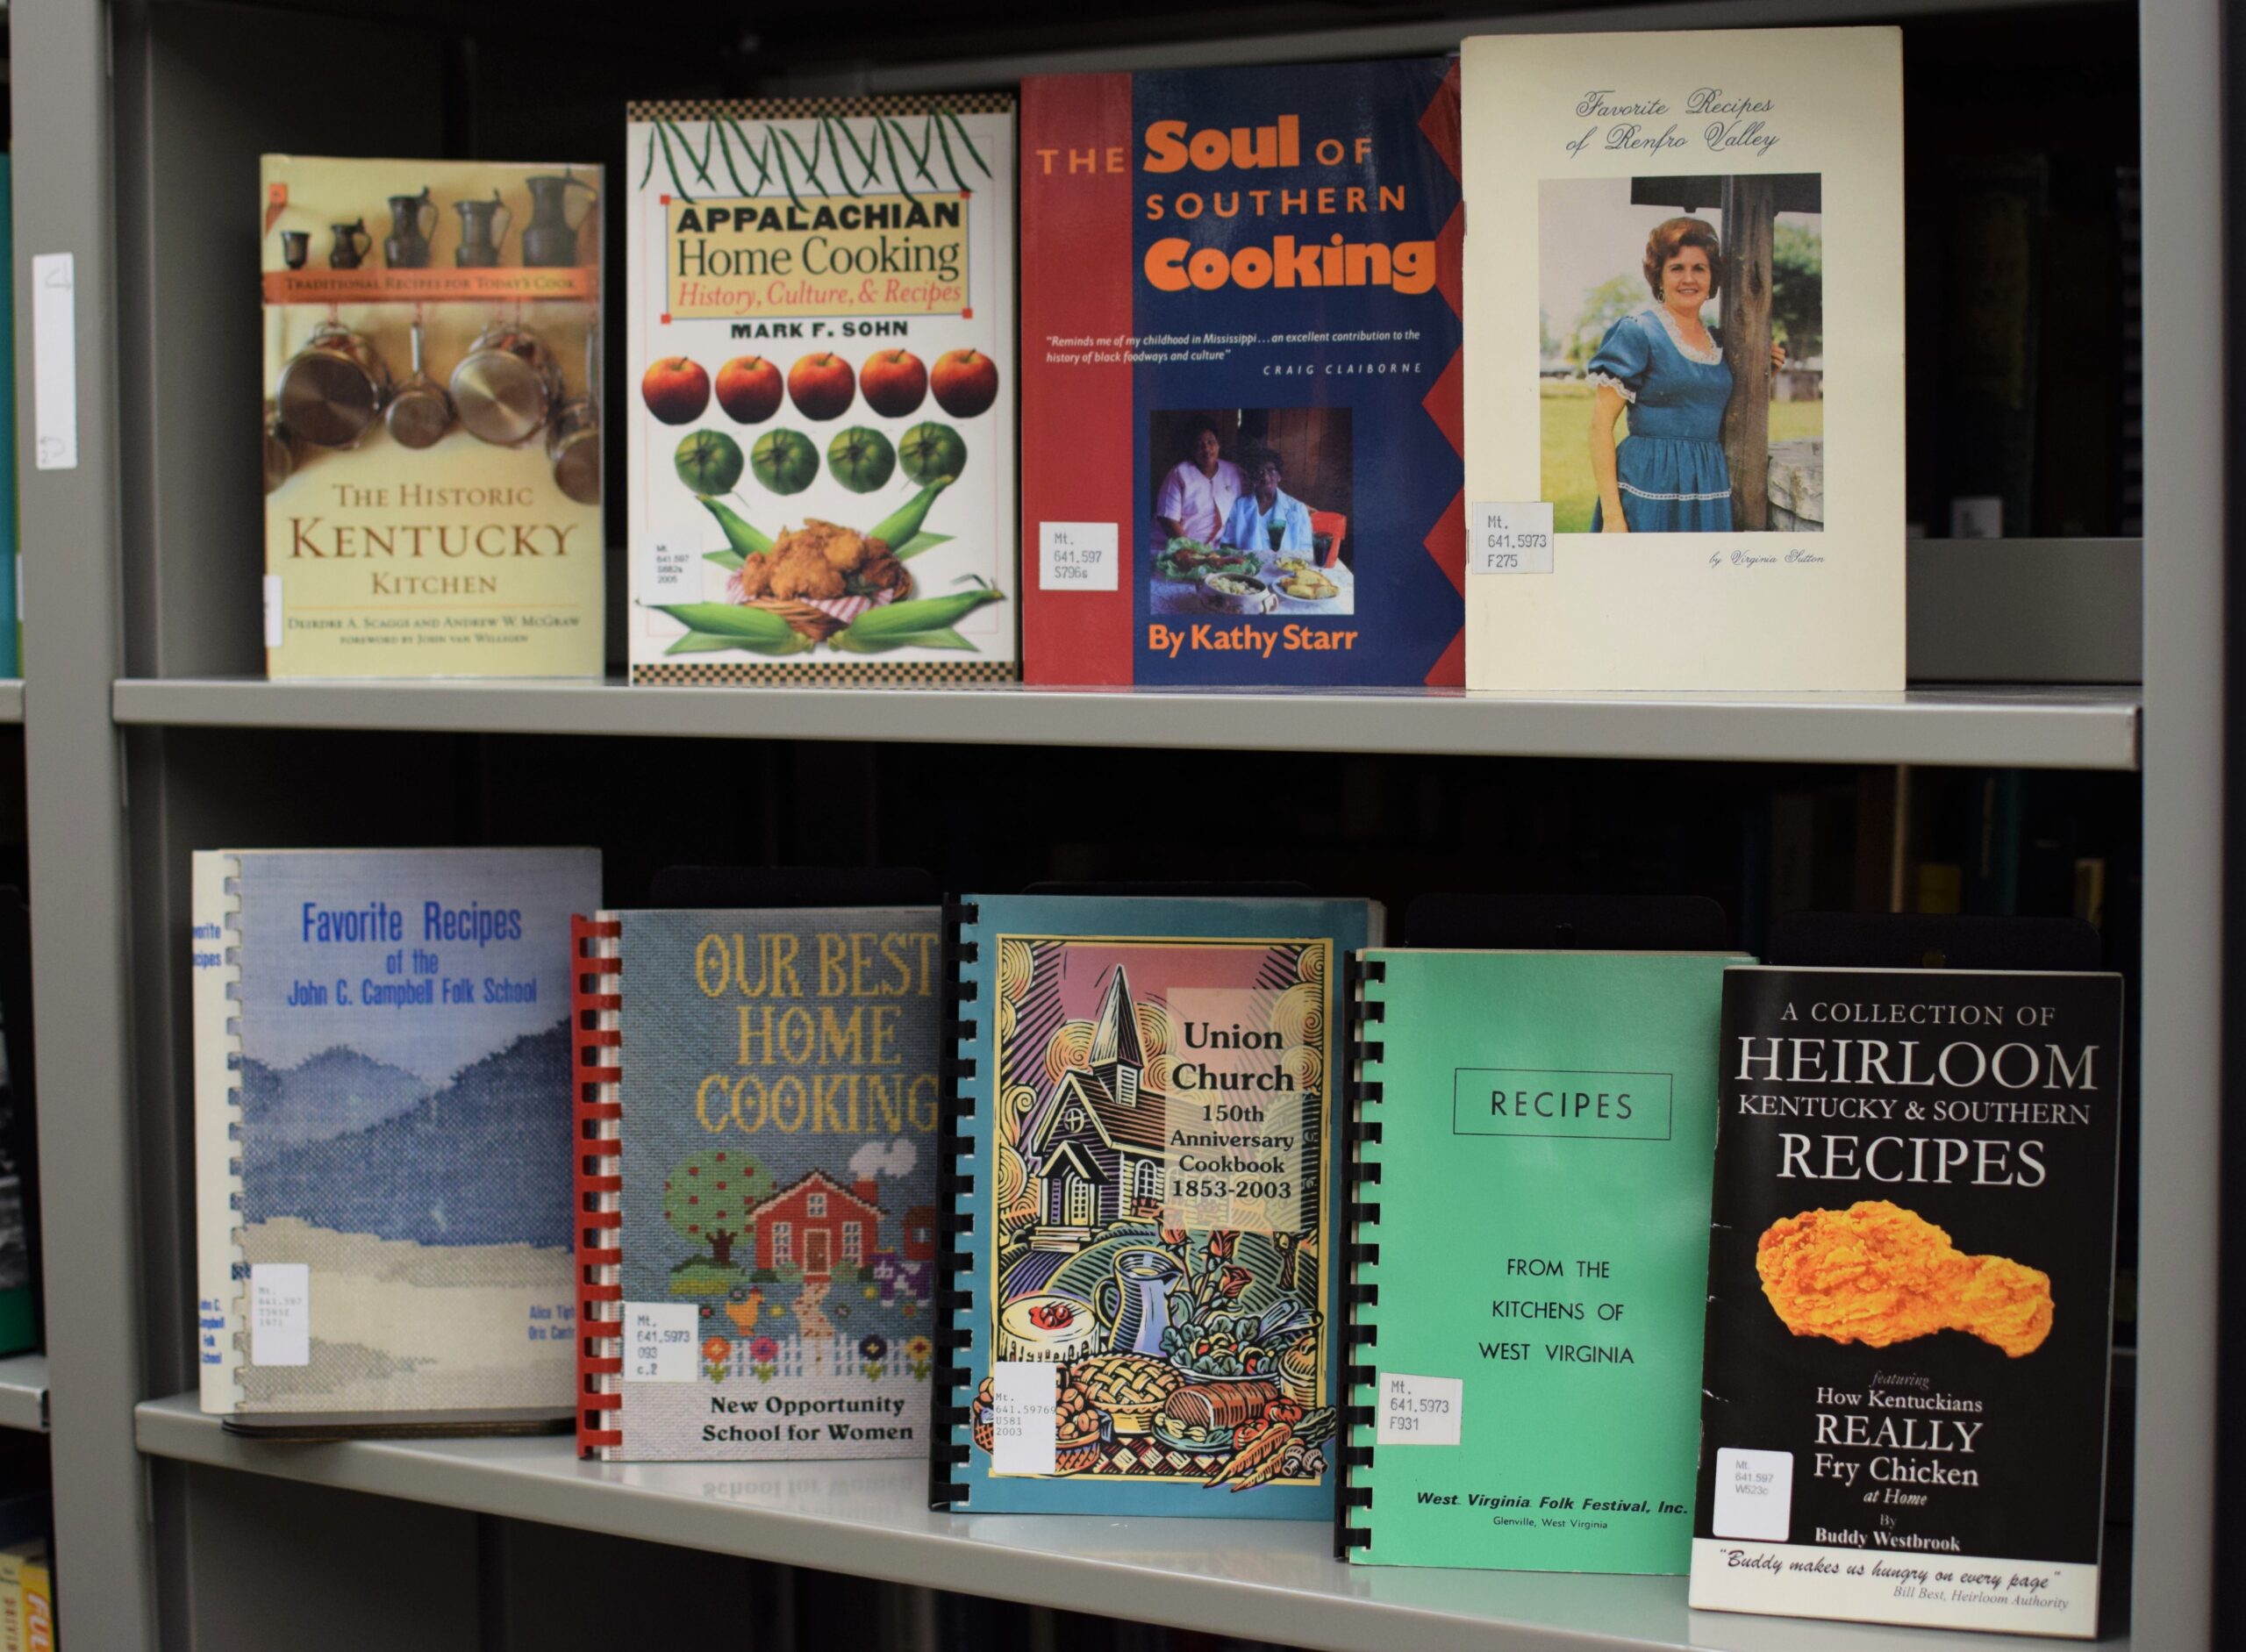 Photograph featuring 9 differing cookbooks on metal shelving in a library collection.